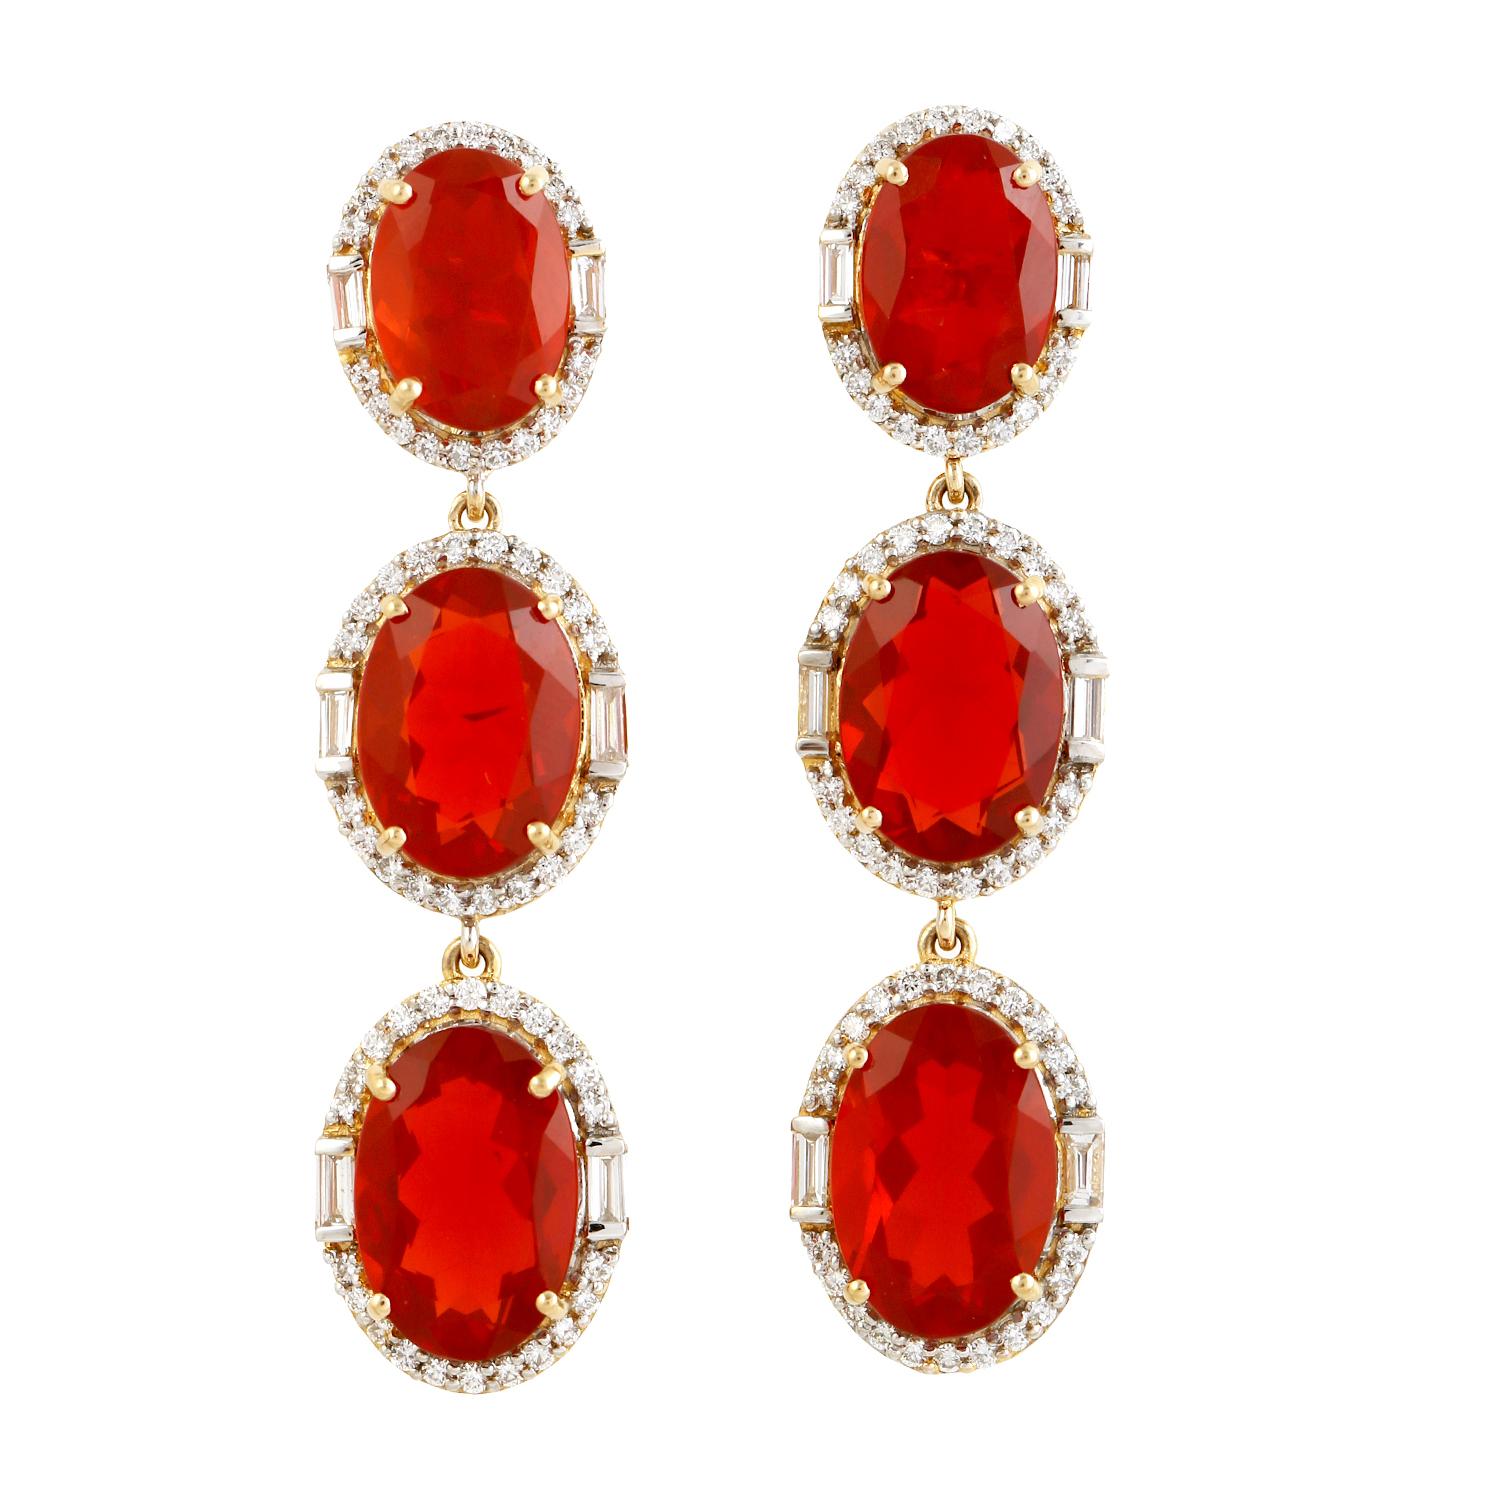 Mixed Cut Three Tier Fire Opal Earrings With Pave Diamonds In 18k yellow Gold For Sale